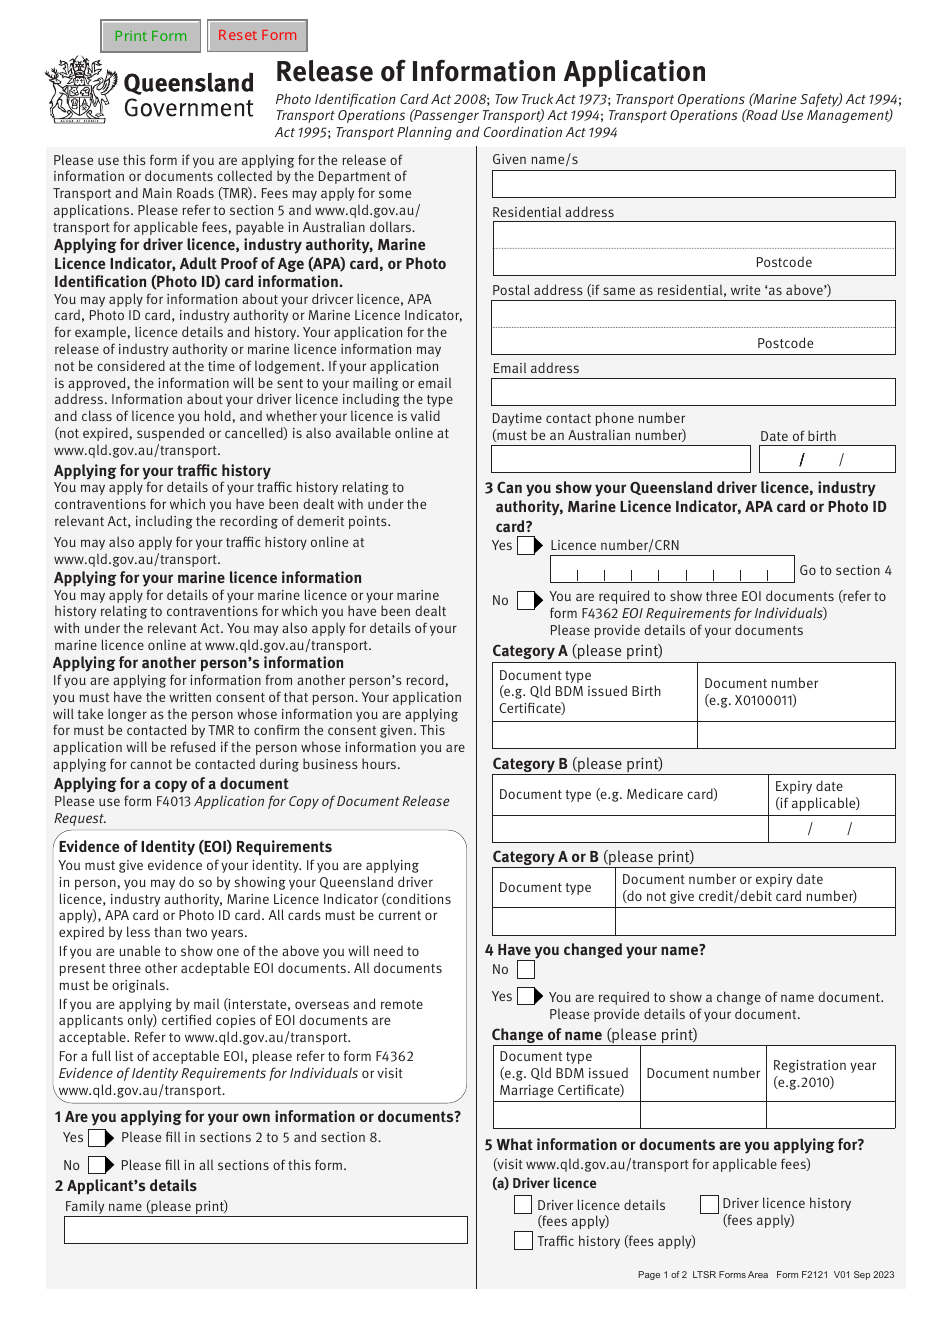 Form F2121 Release of Information Application - Queensland, Australia, Page 1